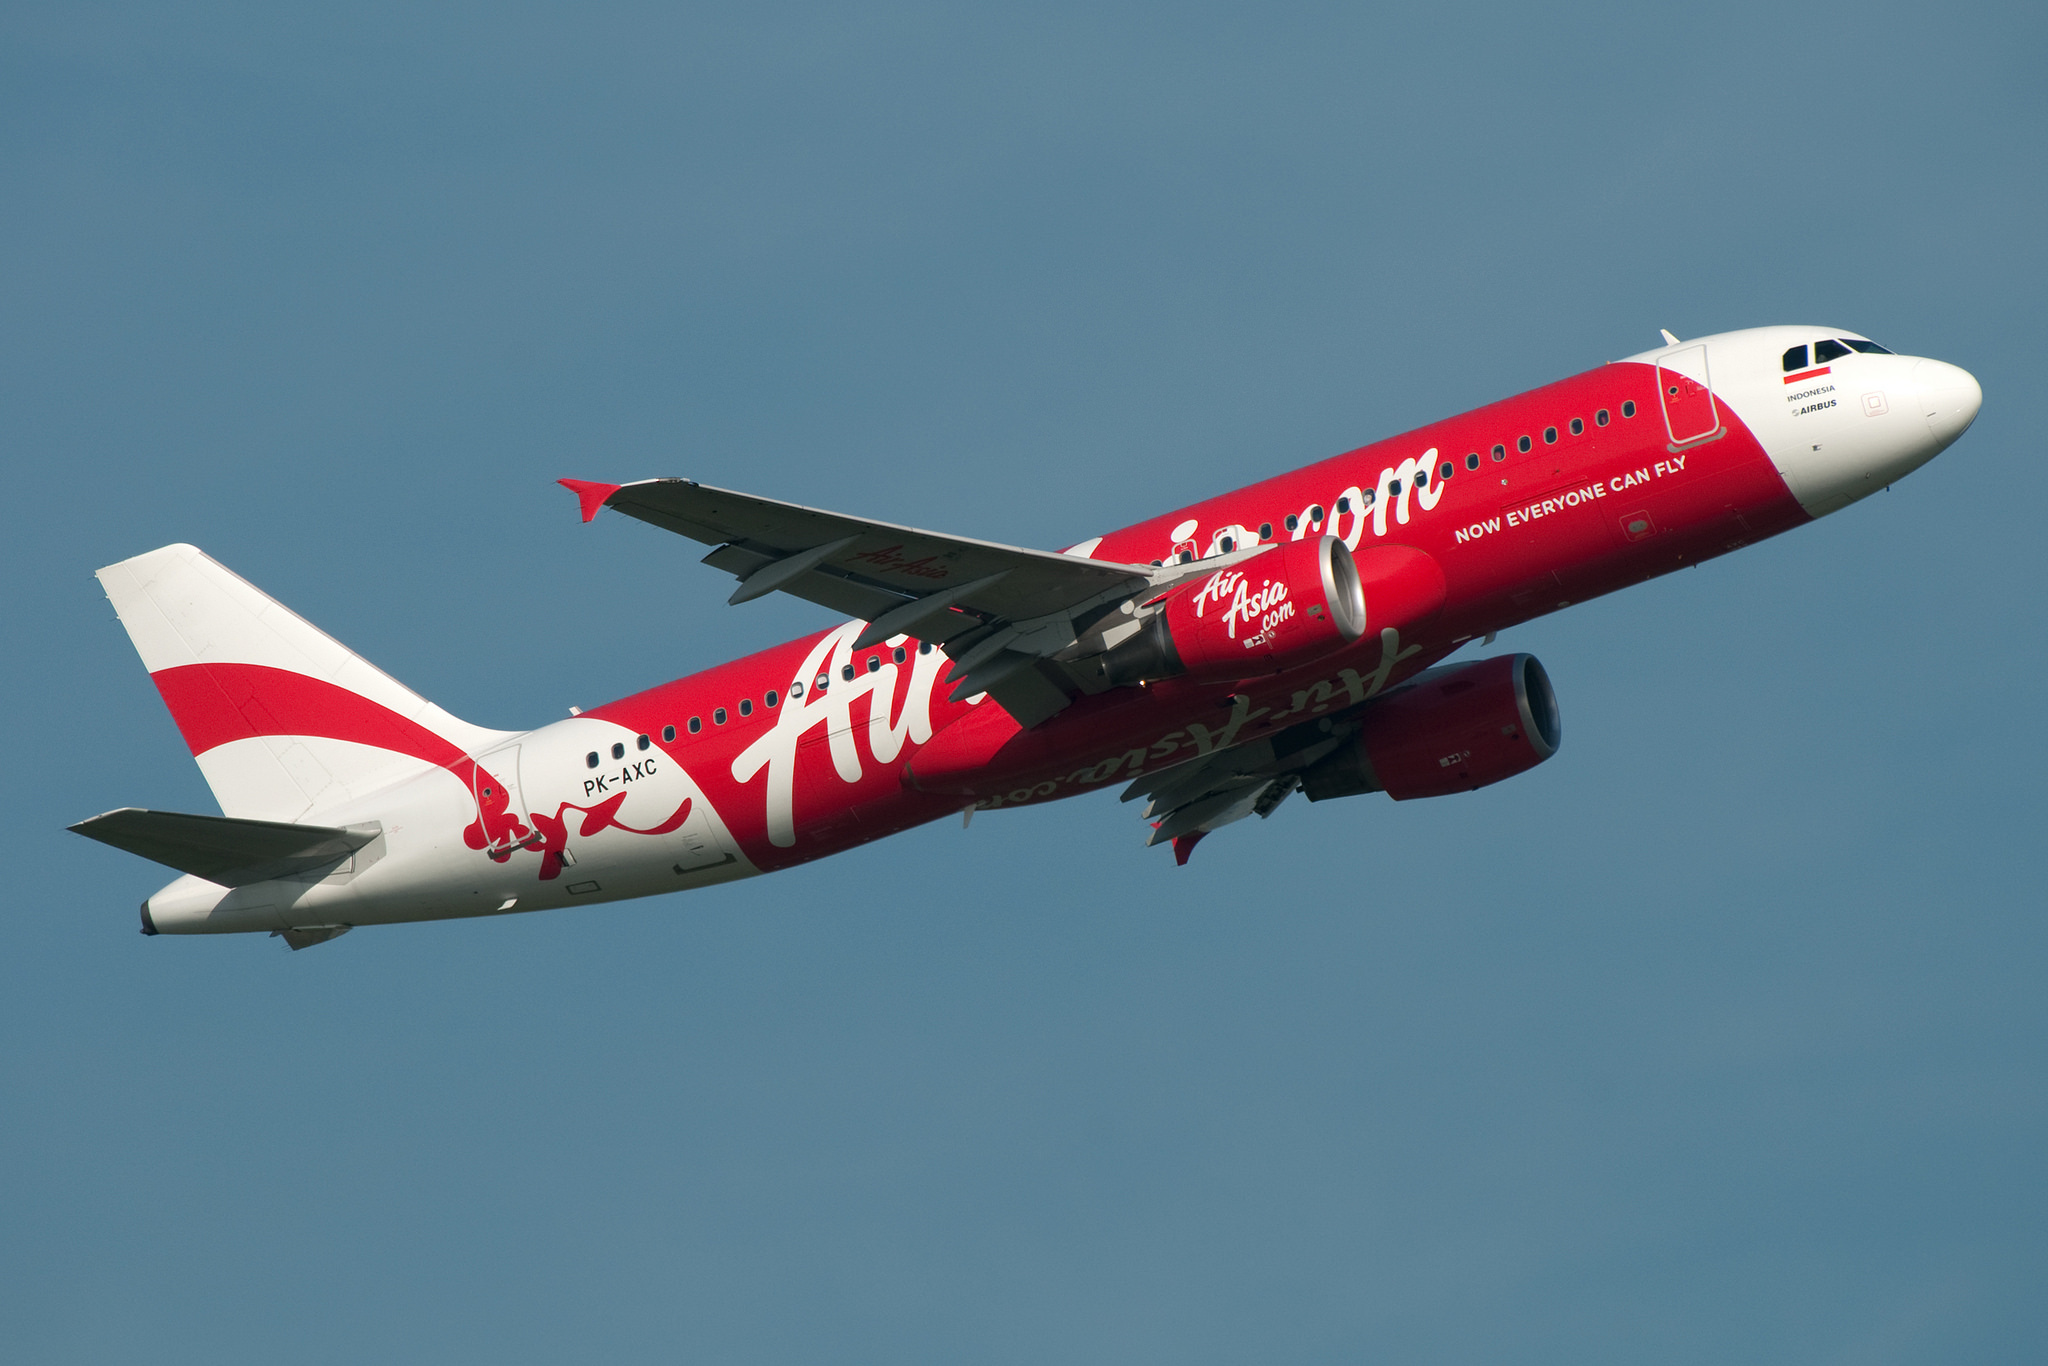 The Air Asia Airbus A320 in question ( PK-AXC) seen in 2010 - Photo: Bruno Geiger | Flickr CC